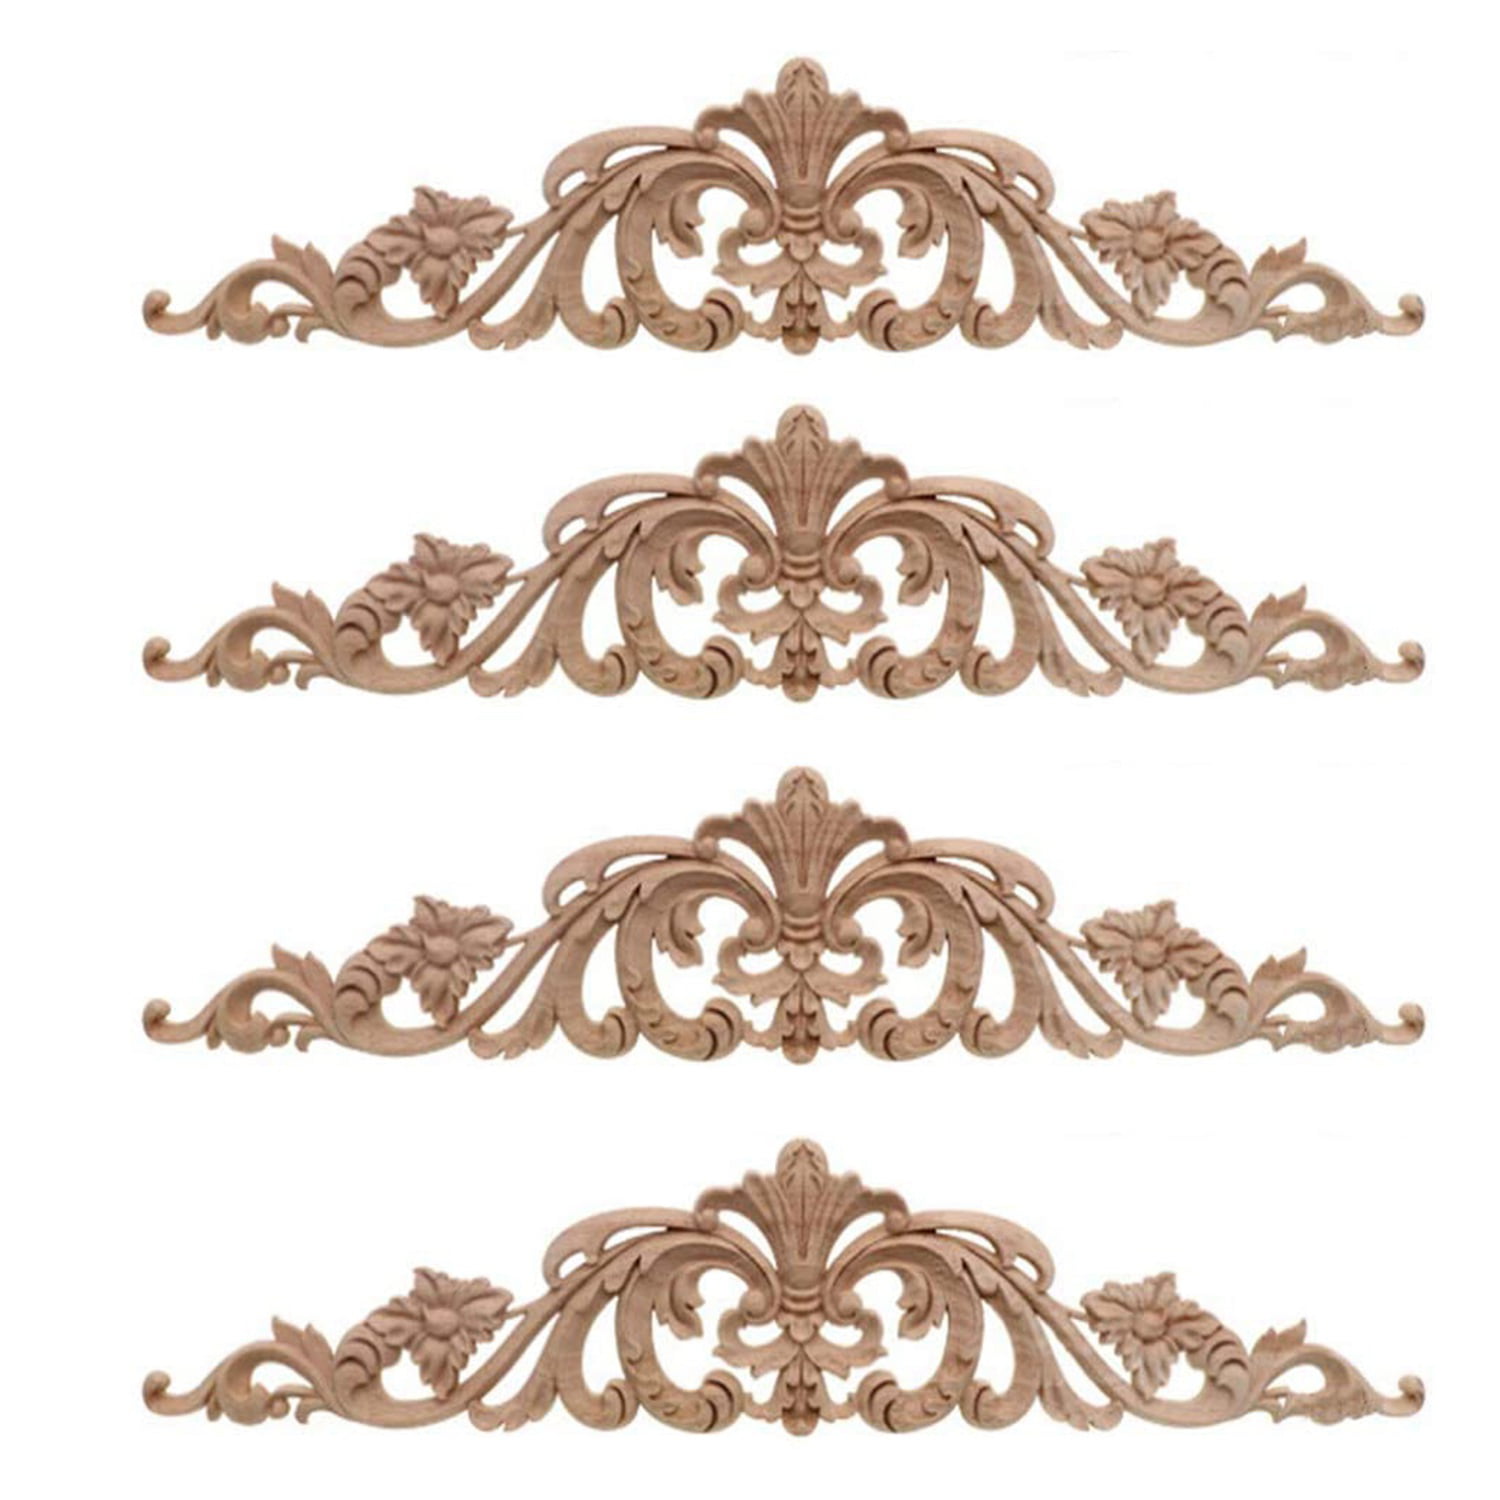 Carved Applique Home Bed Cabinet Wood Wall Decal Onlay Vintage Floral Door Decor 